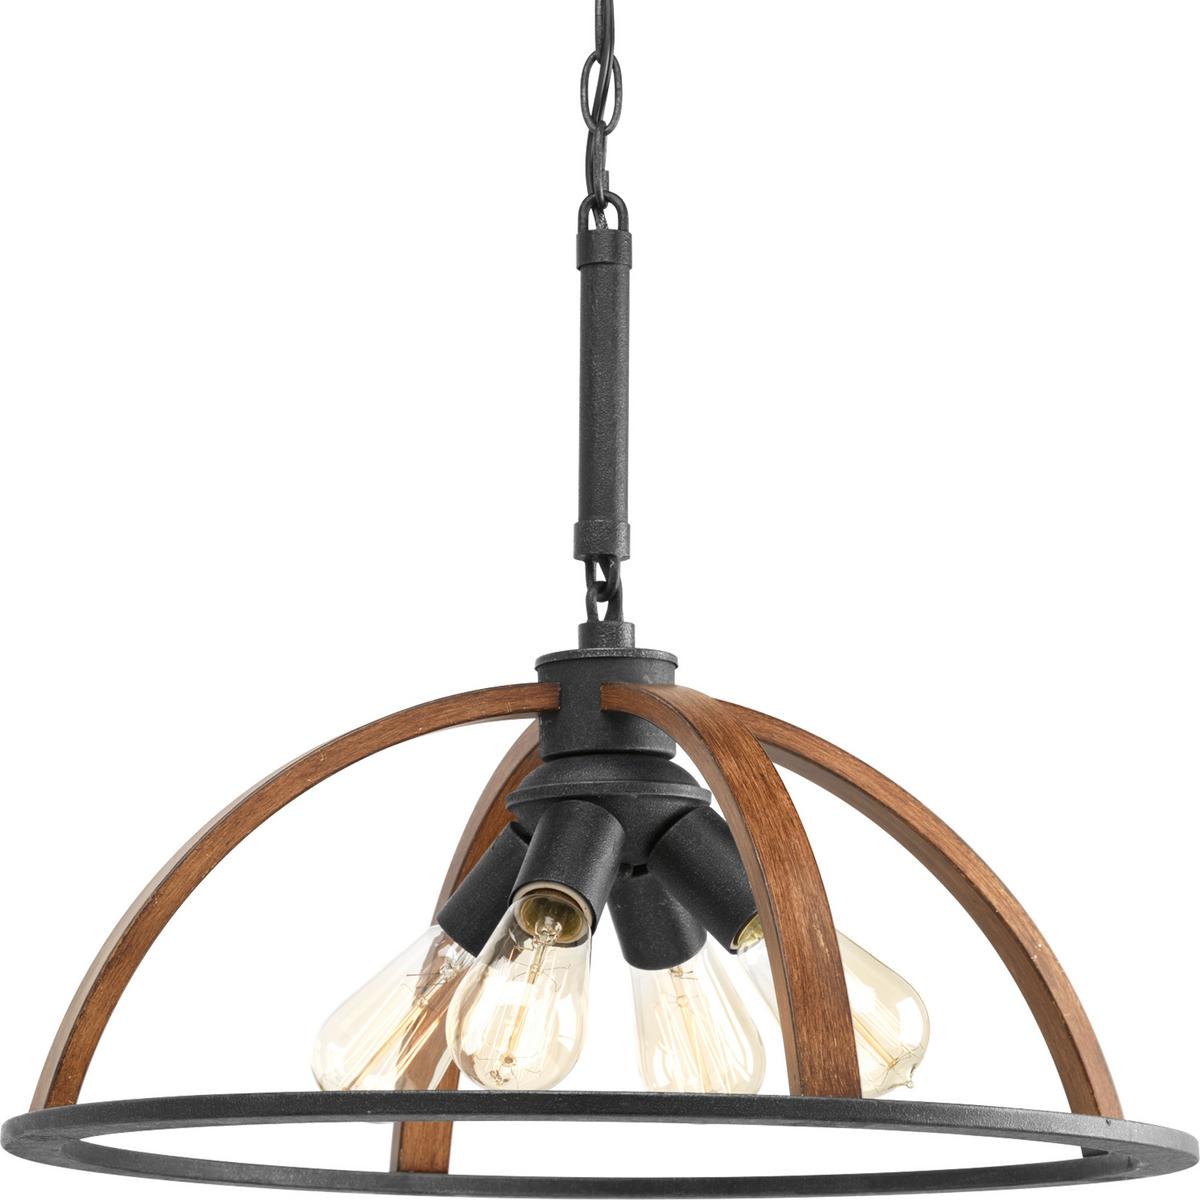 Hubbell P5168-71 Fixtures within the Trestle collection offer a handsome look for industrial or rustic living spaces. Featuring a hand painted cage with geometric elements, pendant and linear options can revive a look over kitchen island or bar, as well as dining and livi